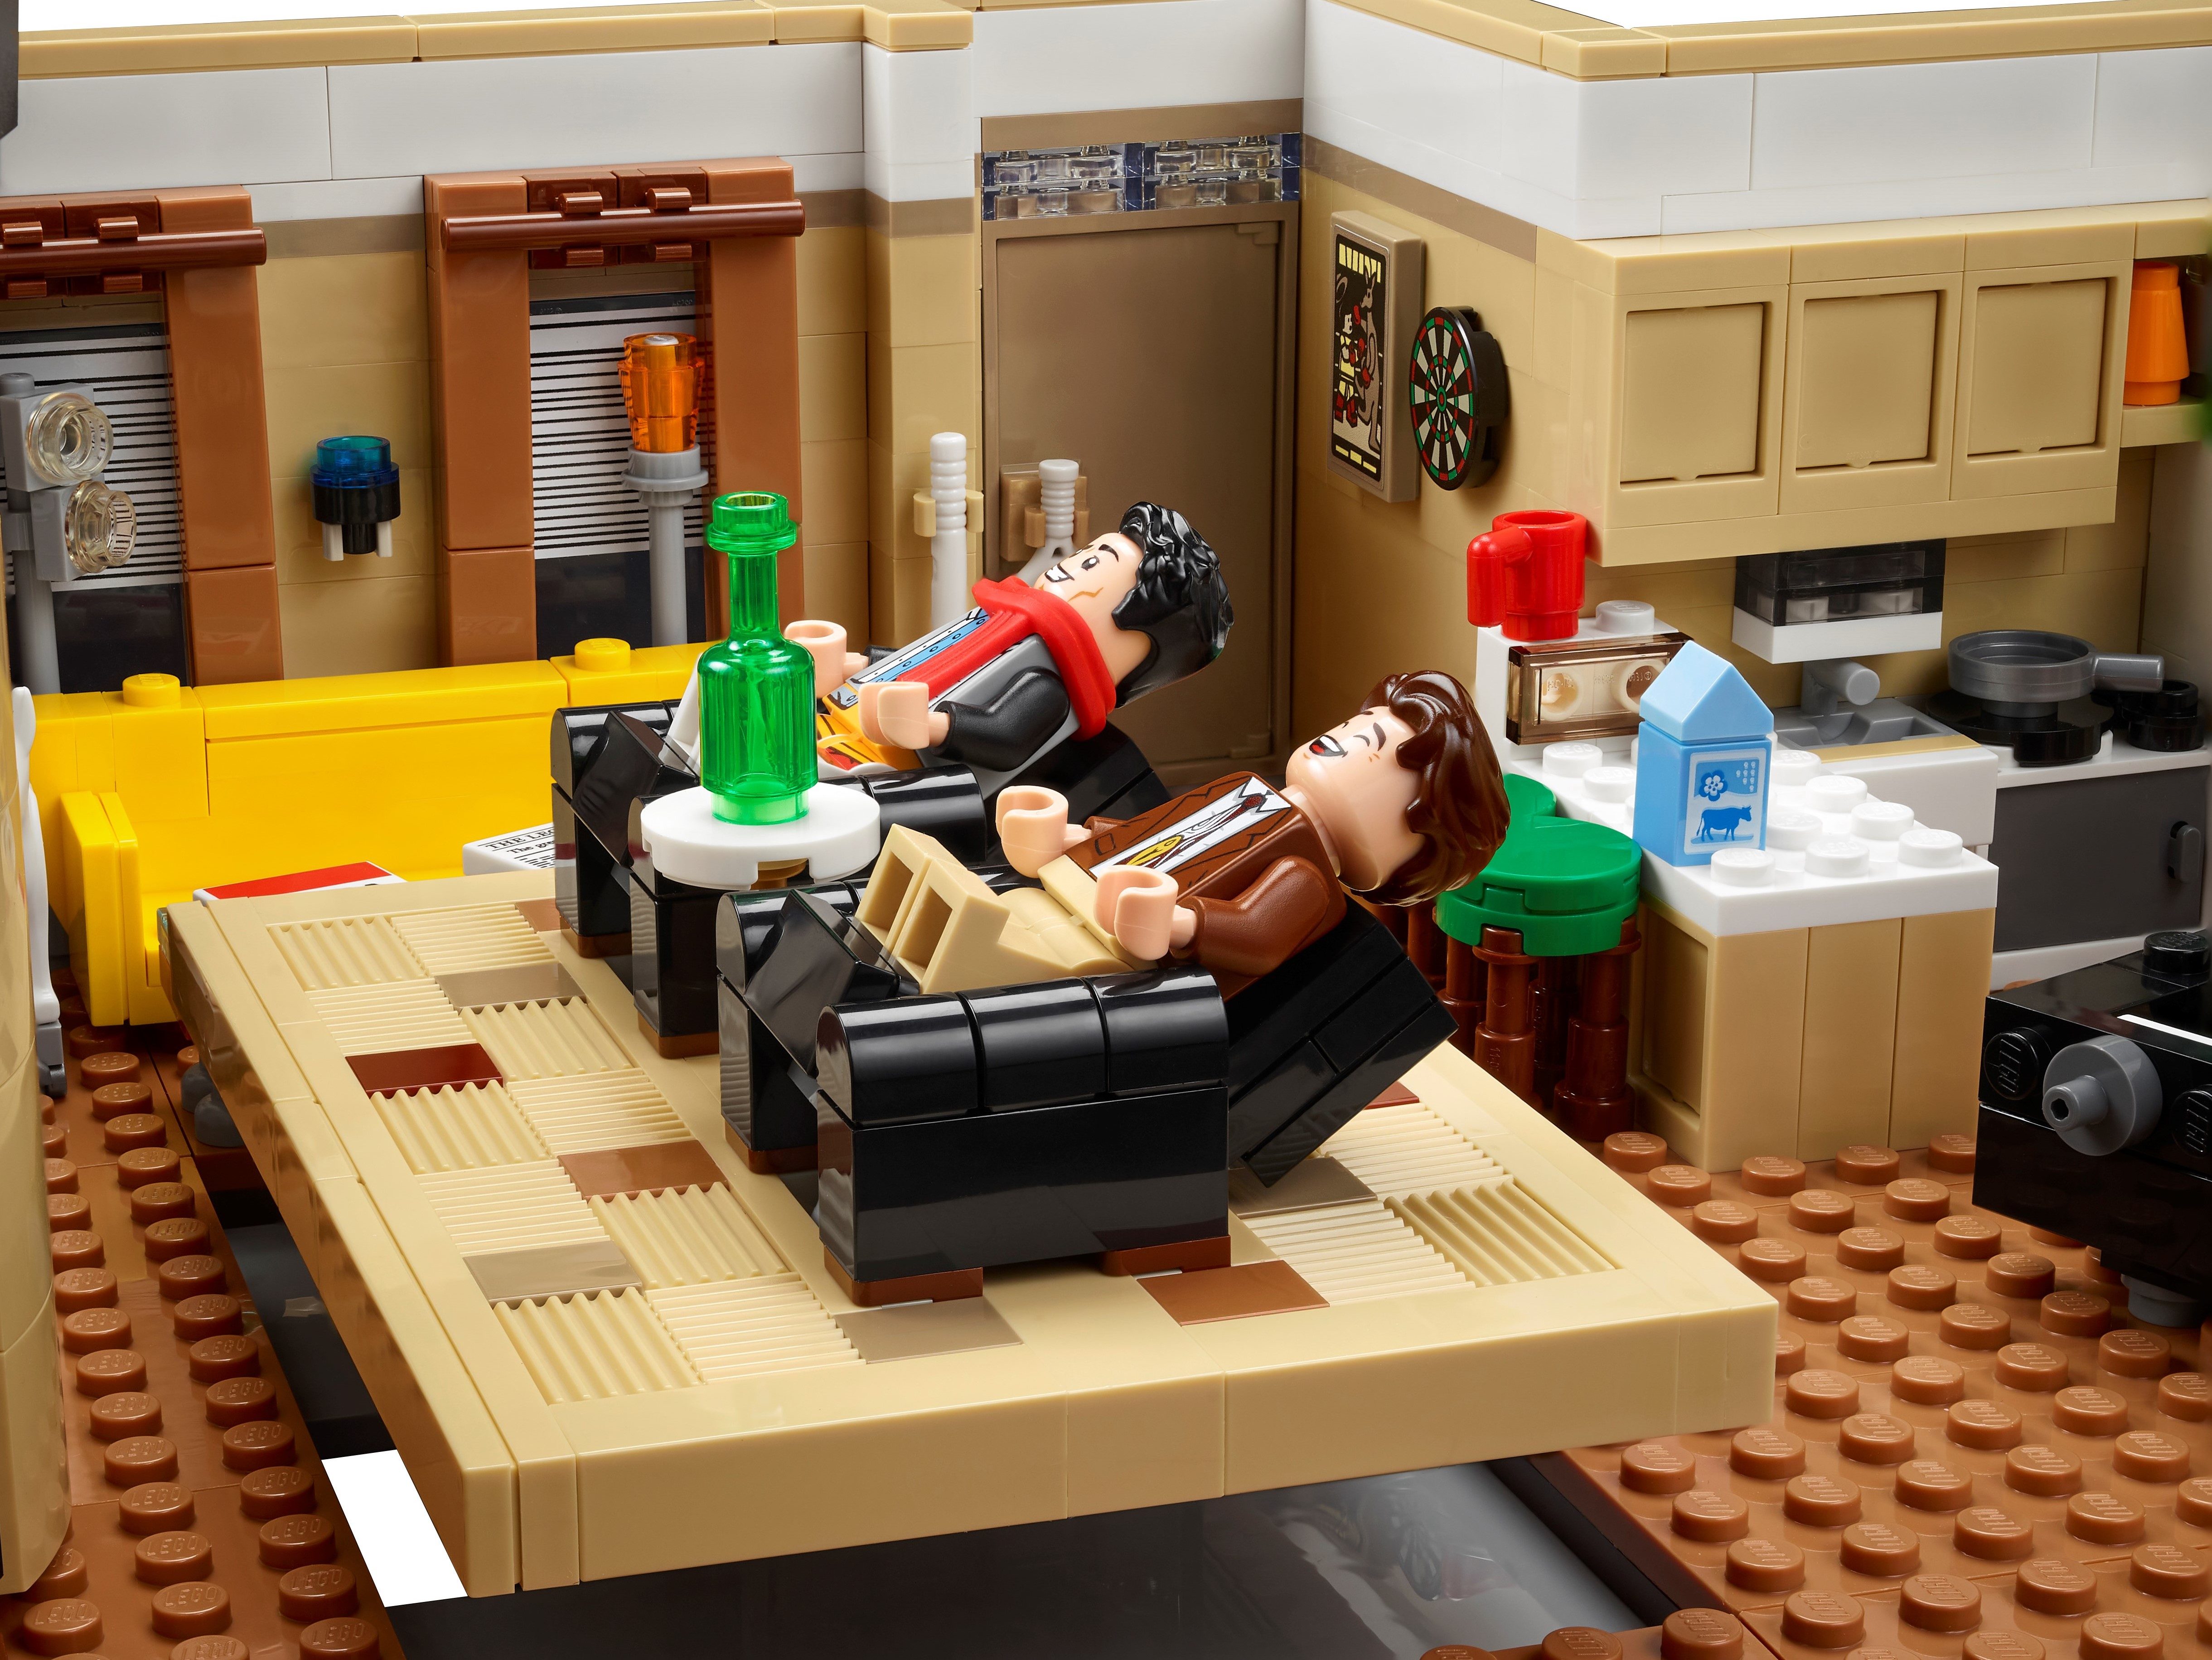 LEGO unveils 2,048-piece FRIENDS set recreating joey and monica's